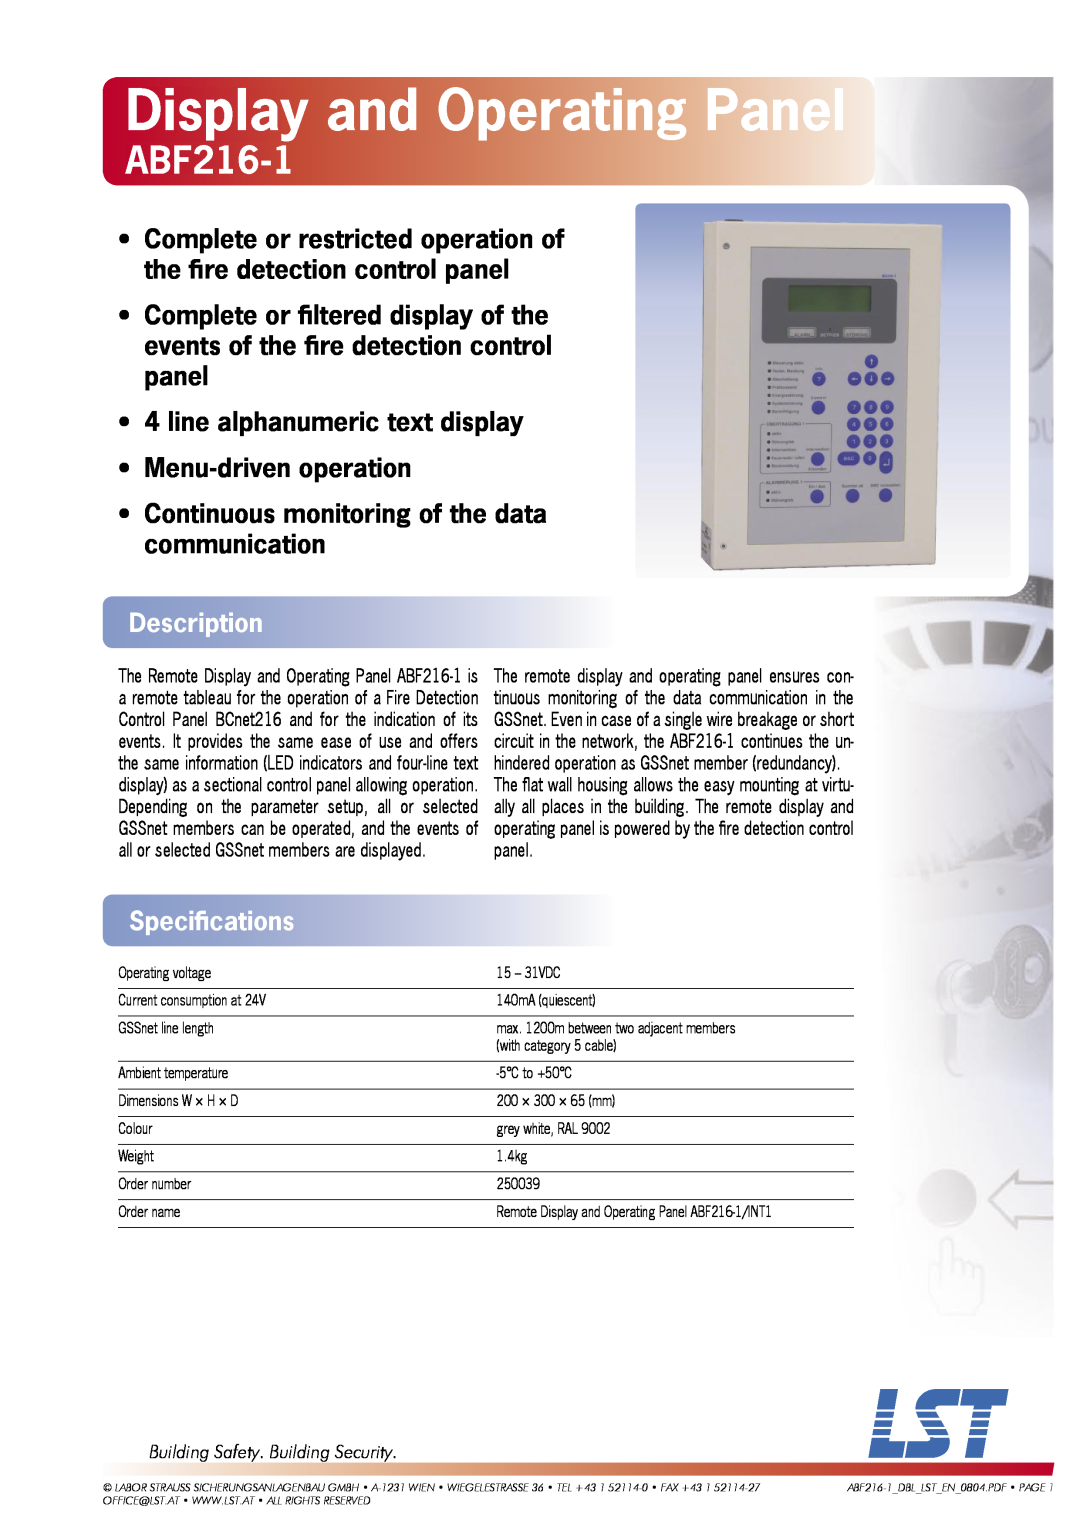 LST ABF216-1 specifications Display and Operating Panel, line alphanumeric text display, Menu-drivenoperation, Description 